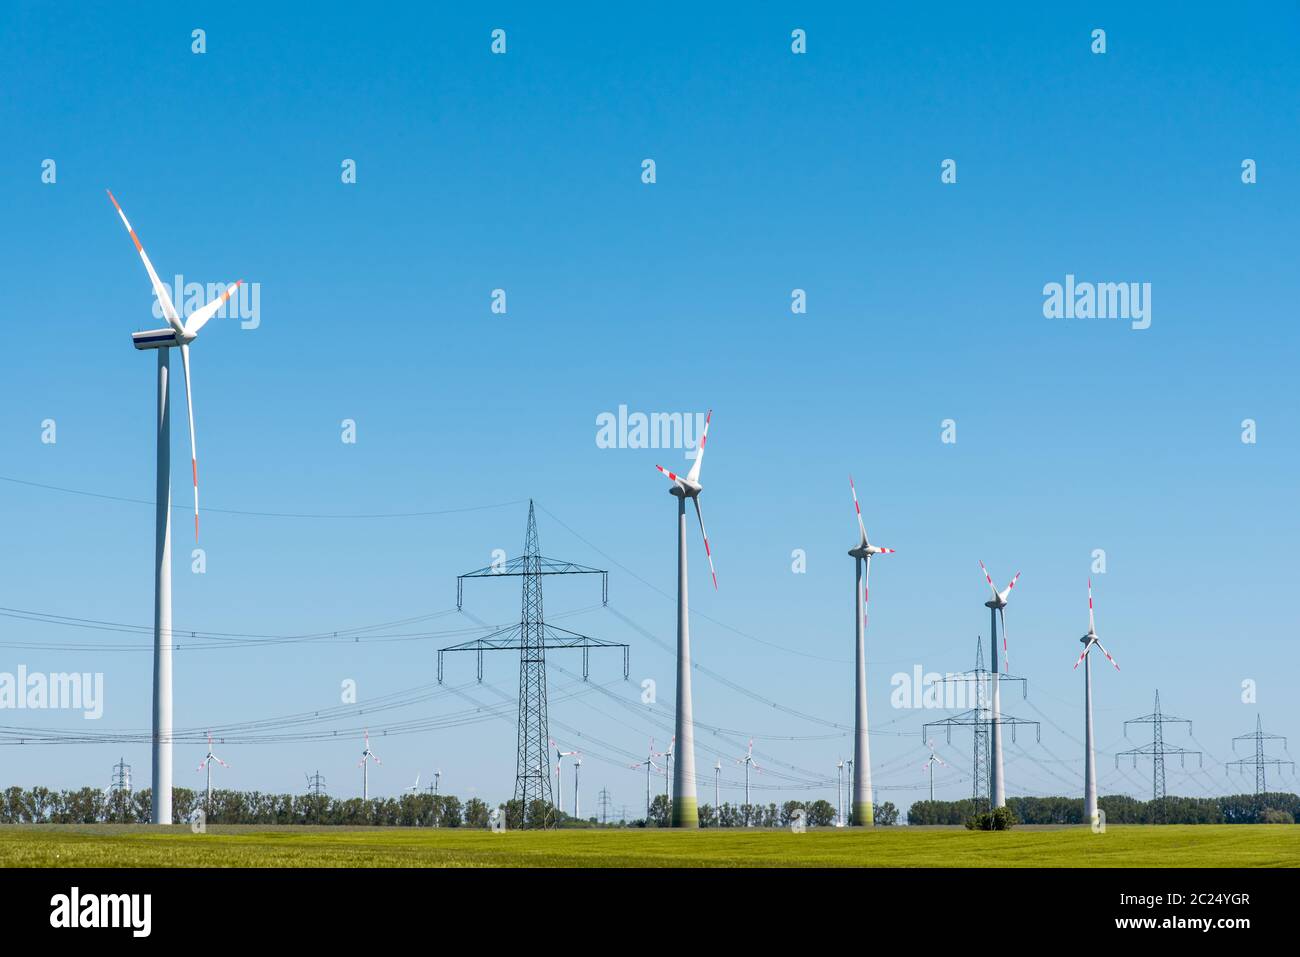 Wind energy plants and an overhead power line seen in Germany Stock Photo